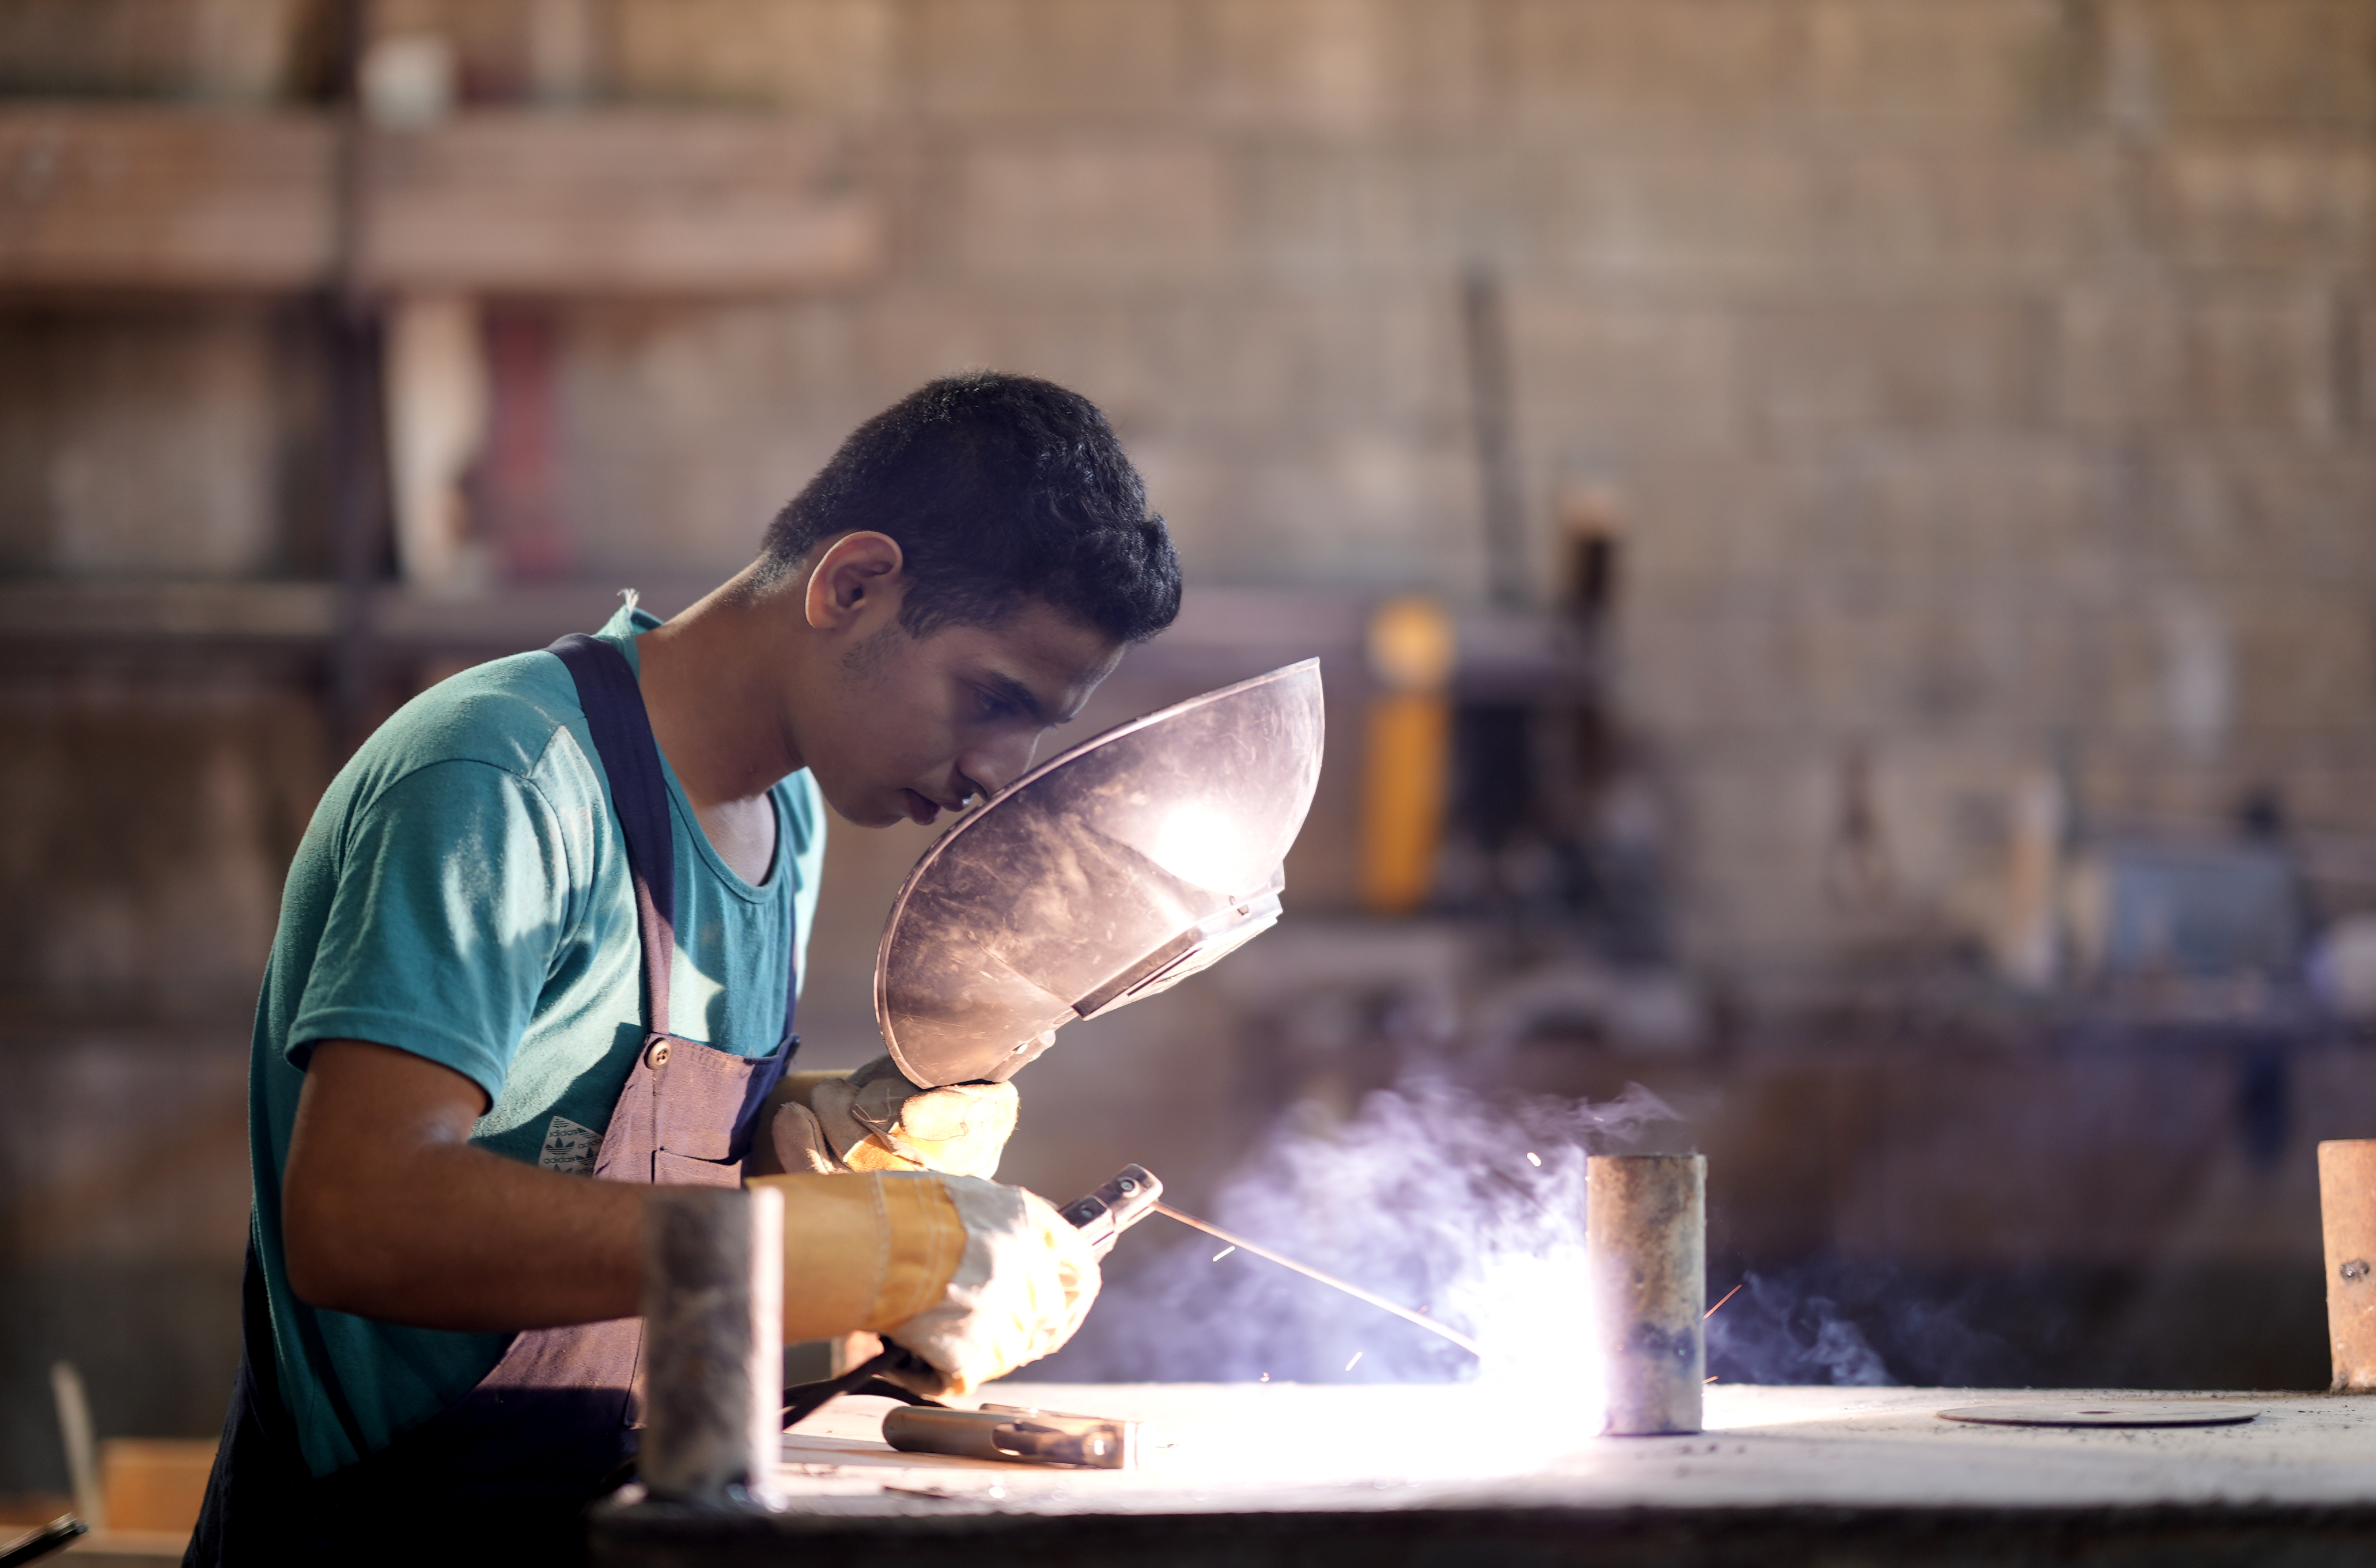 With youth joblessness in Lebanon at record levels, UNICEF, funded by Germany through the German Development Bank KfW, continues to roll out an innovative programme aimed at giving training and work to thousands of the country’s youth while paying them a living wage as they learn.